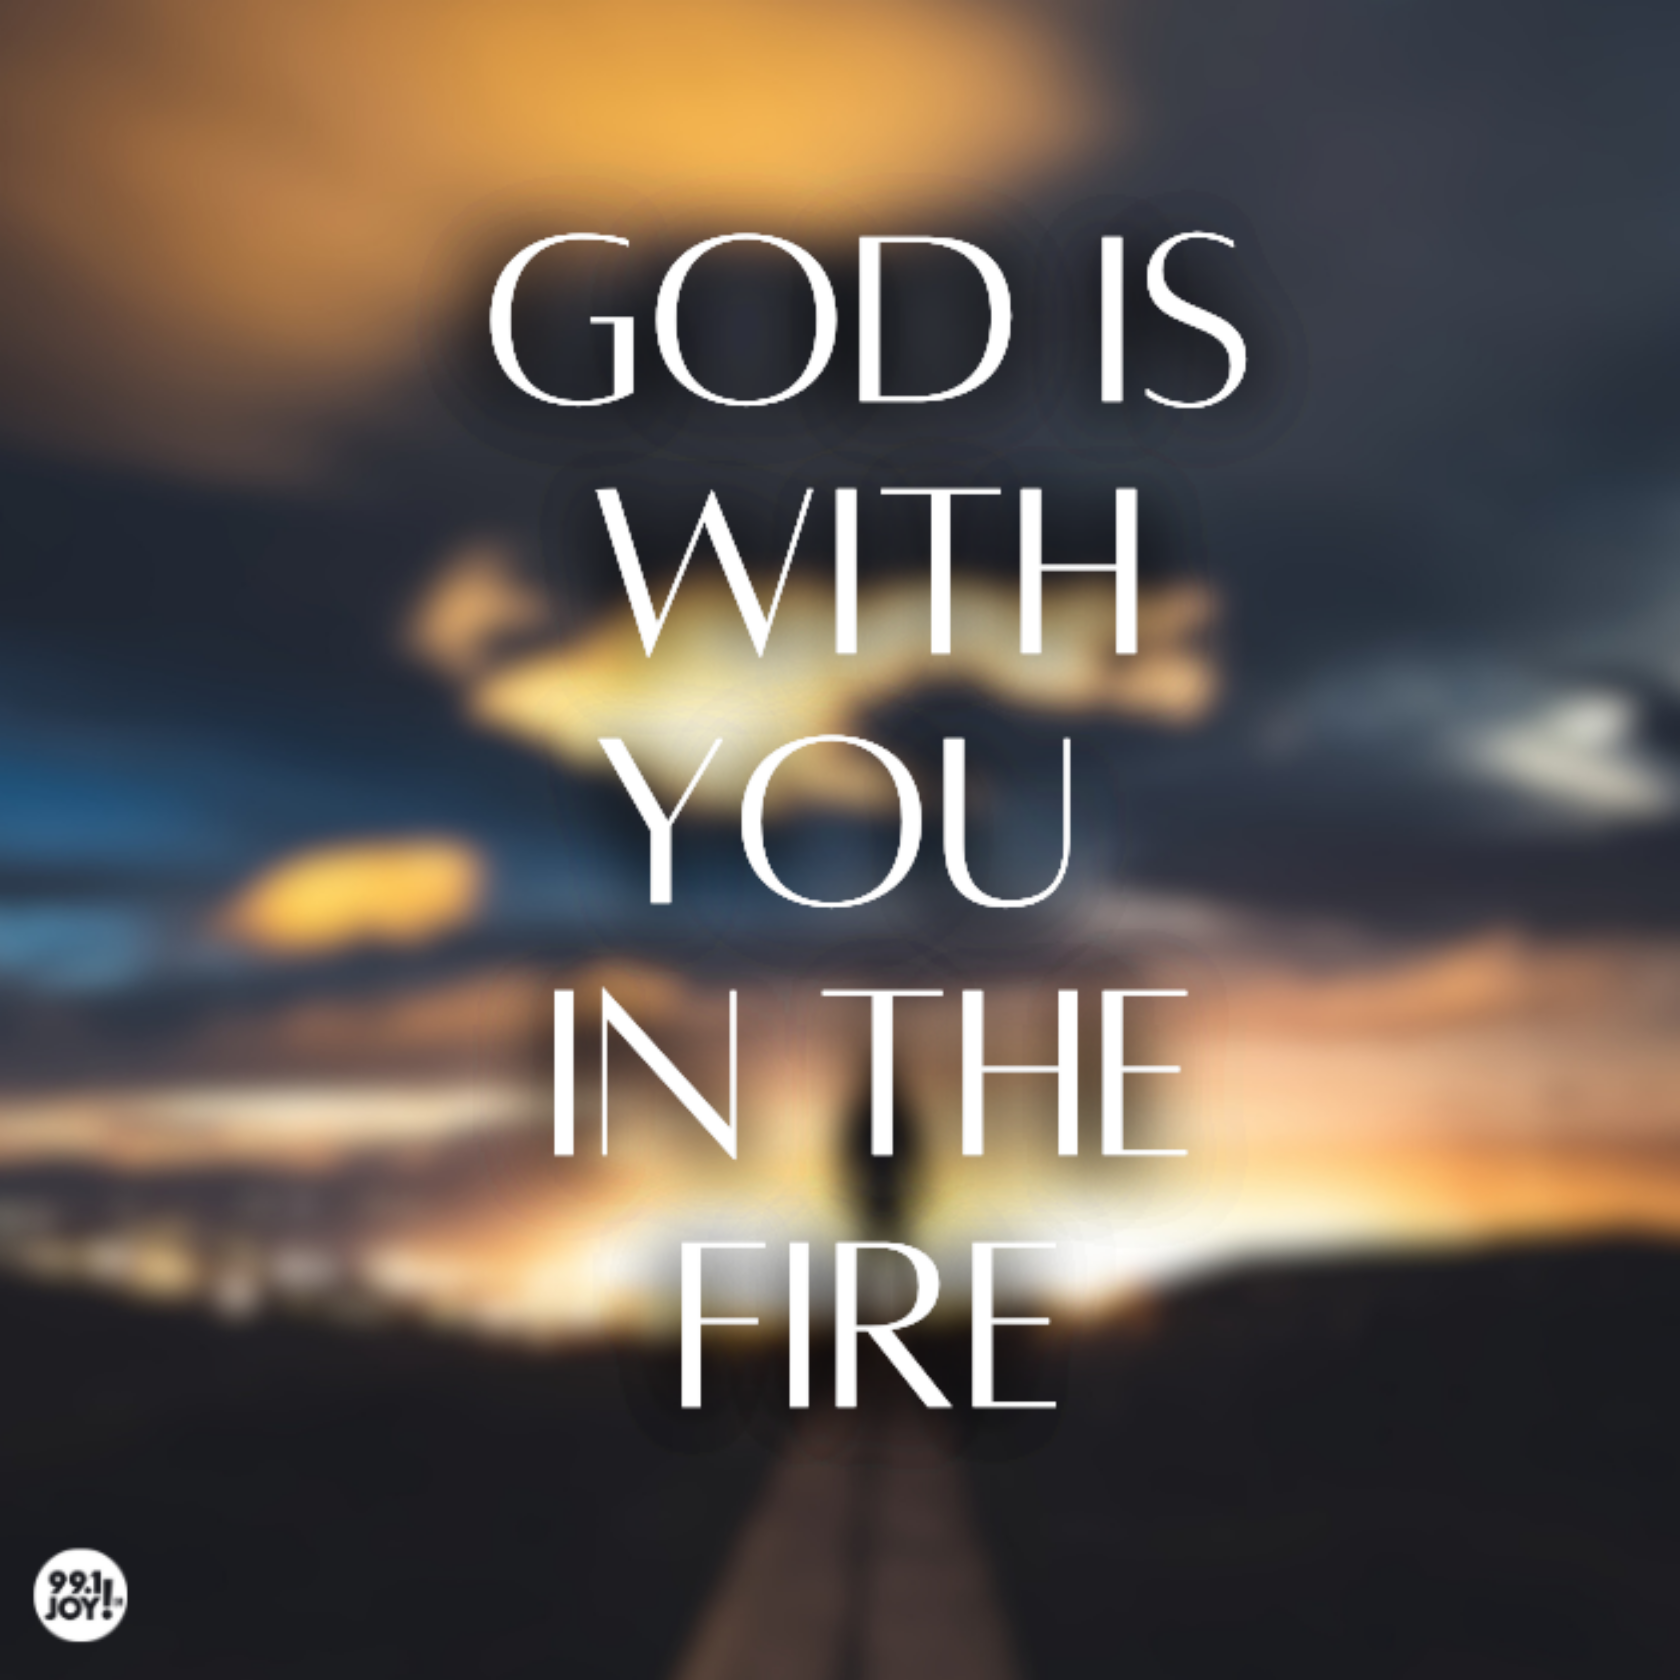 God Is With You In The Fire